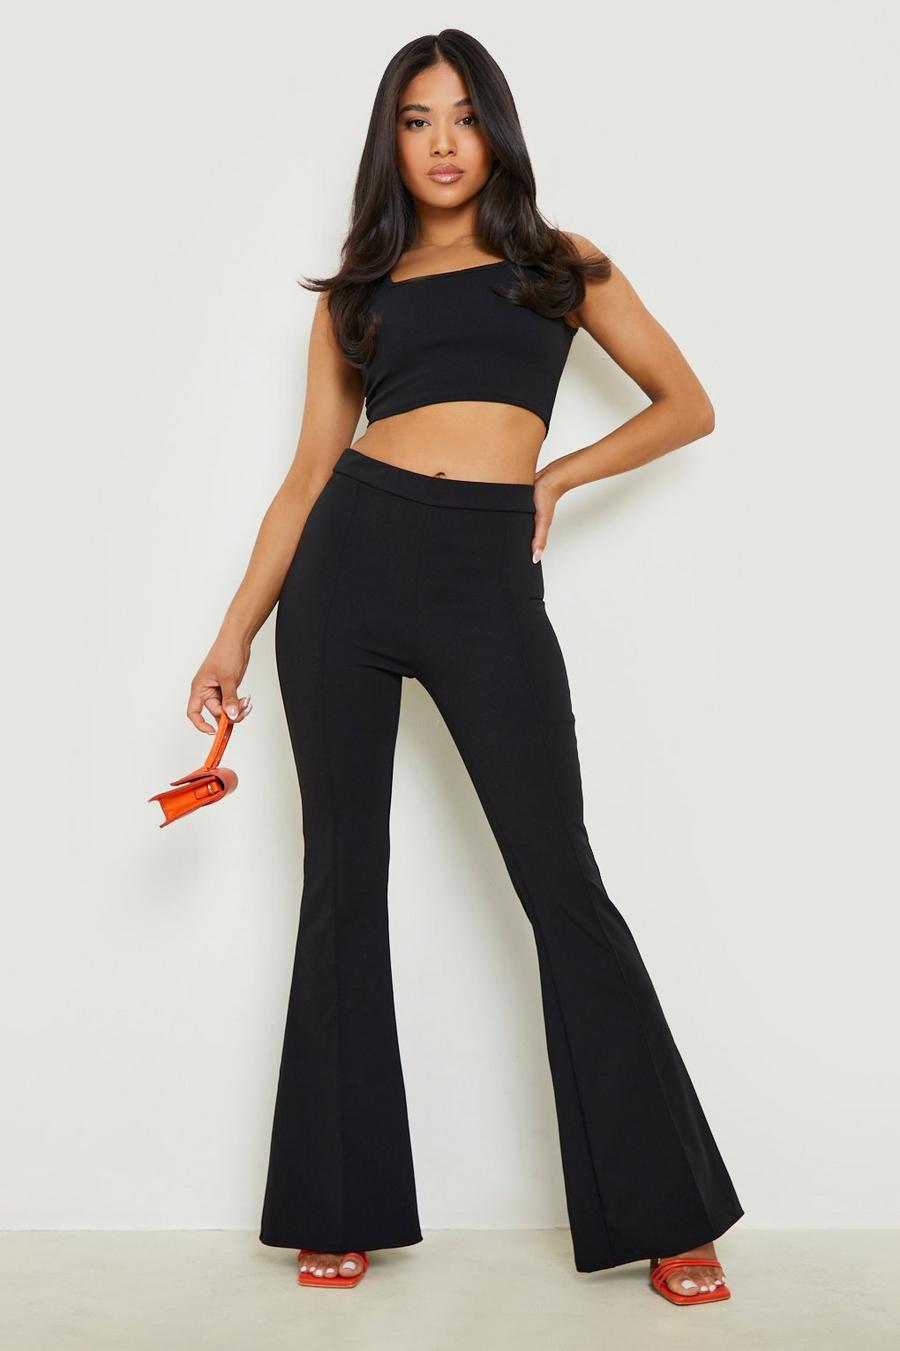 Black Petite Crop Top And Seam Detail Flared Two-Piece